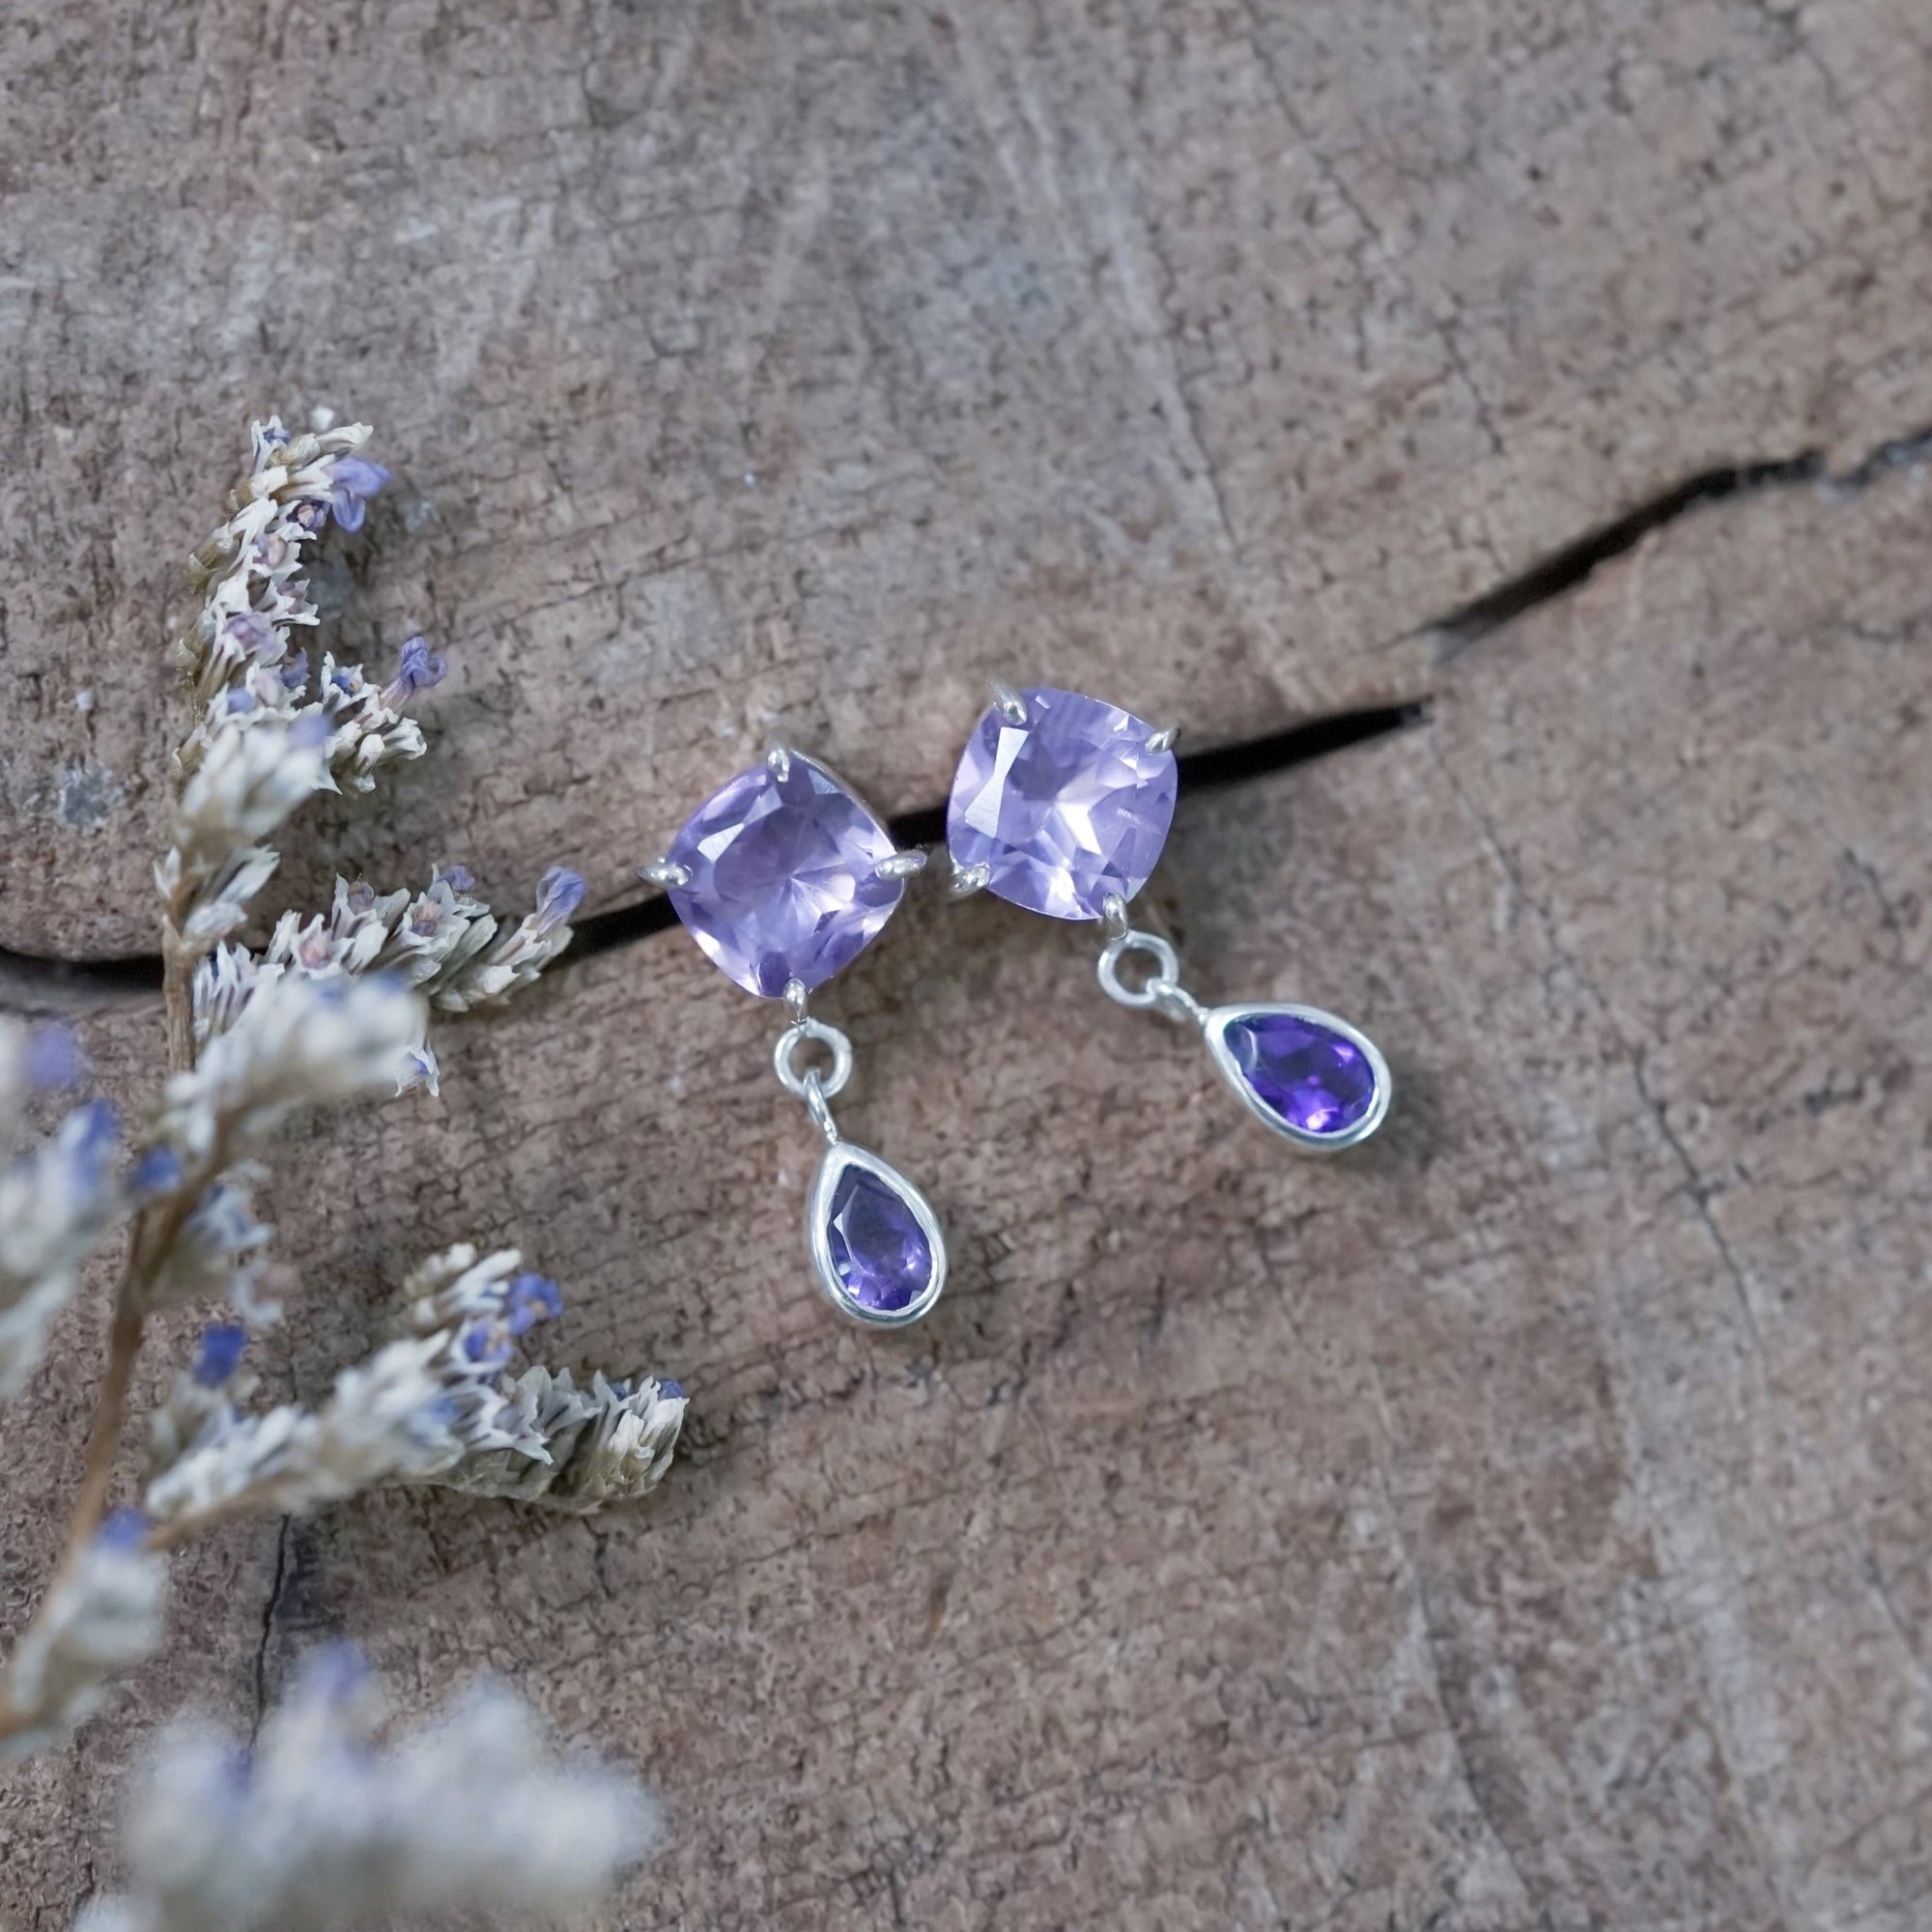 Dangling Amethyst Earrings - Gardens of the Sun | Ethical Jewelry